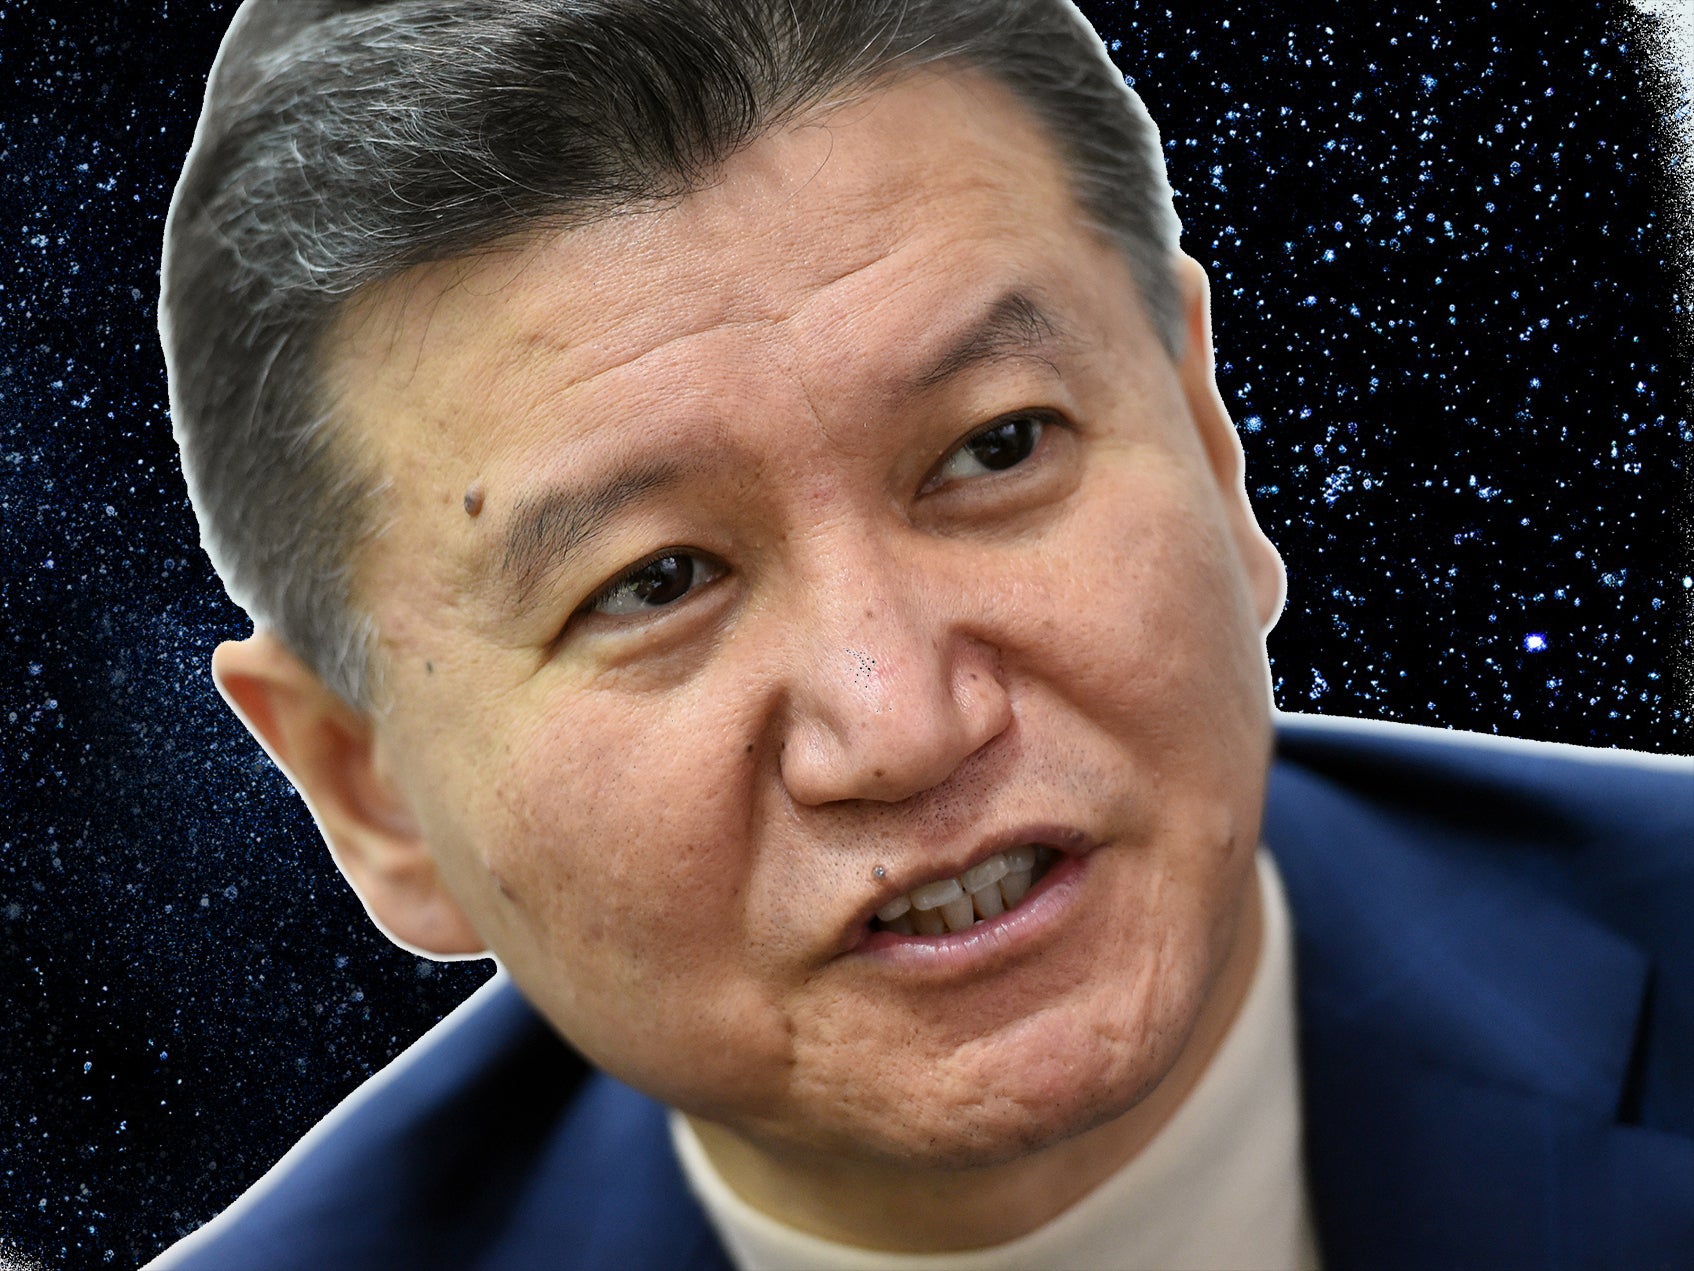 Ilyumzhinov has claimed that he was abducted by aliens in 1997